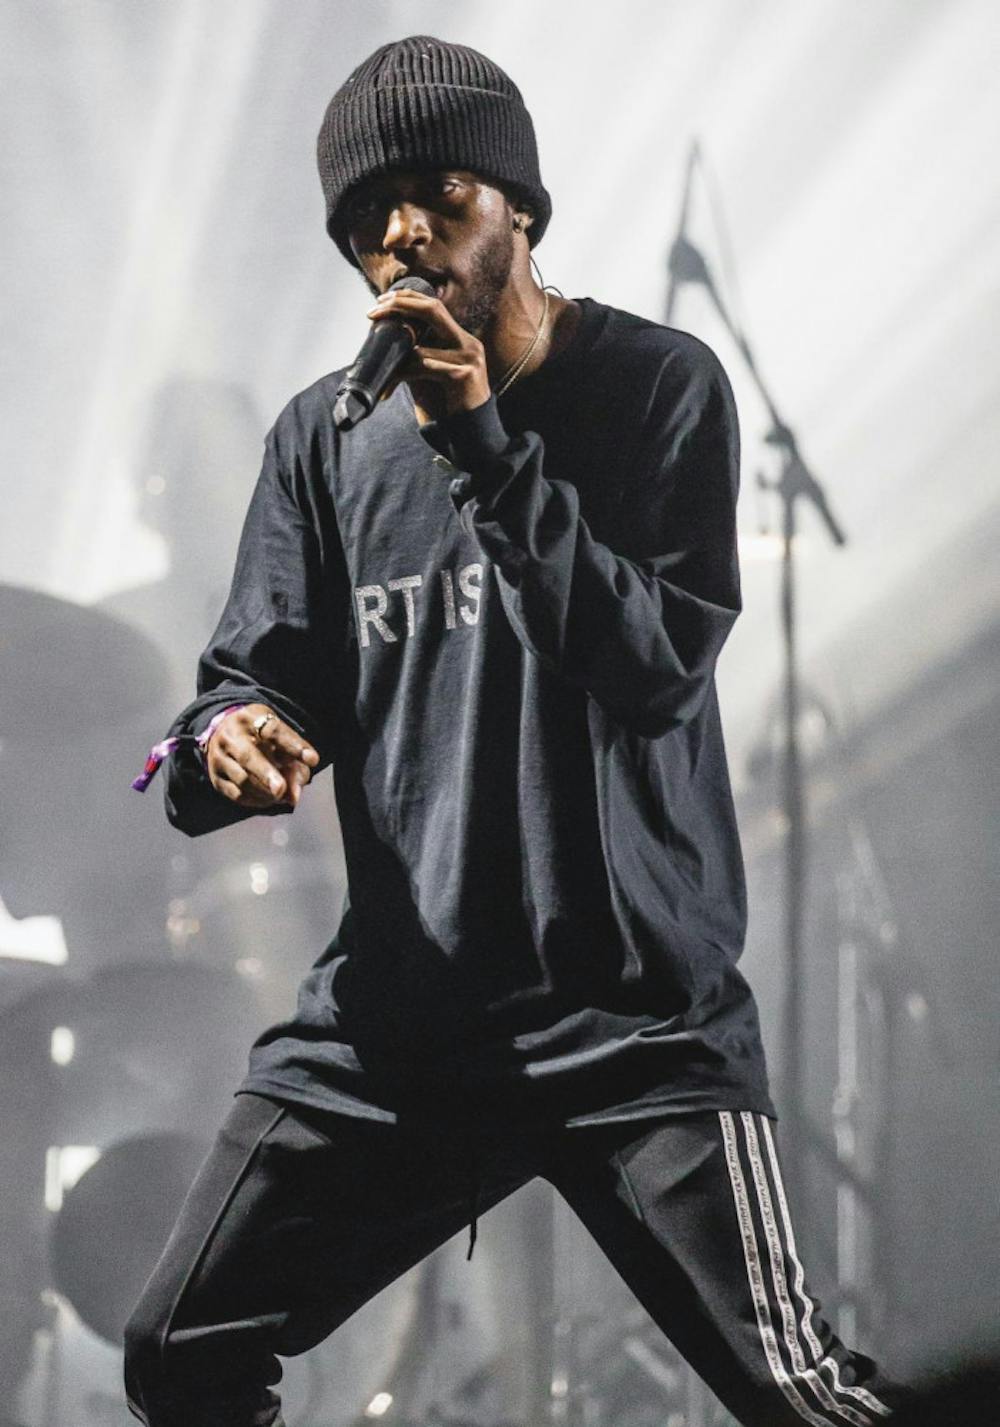 6lack performing August 2017. Photo provided by Wikipedia Commons.